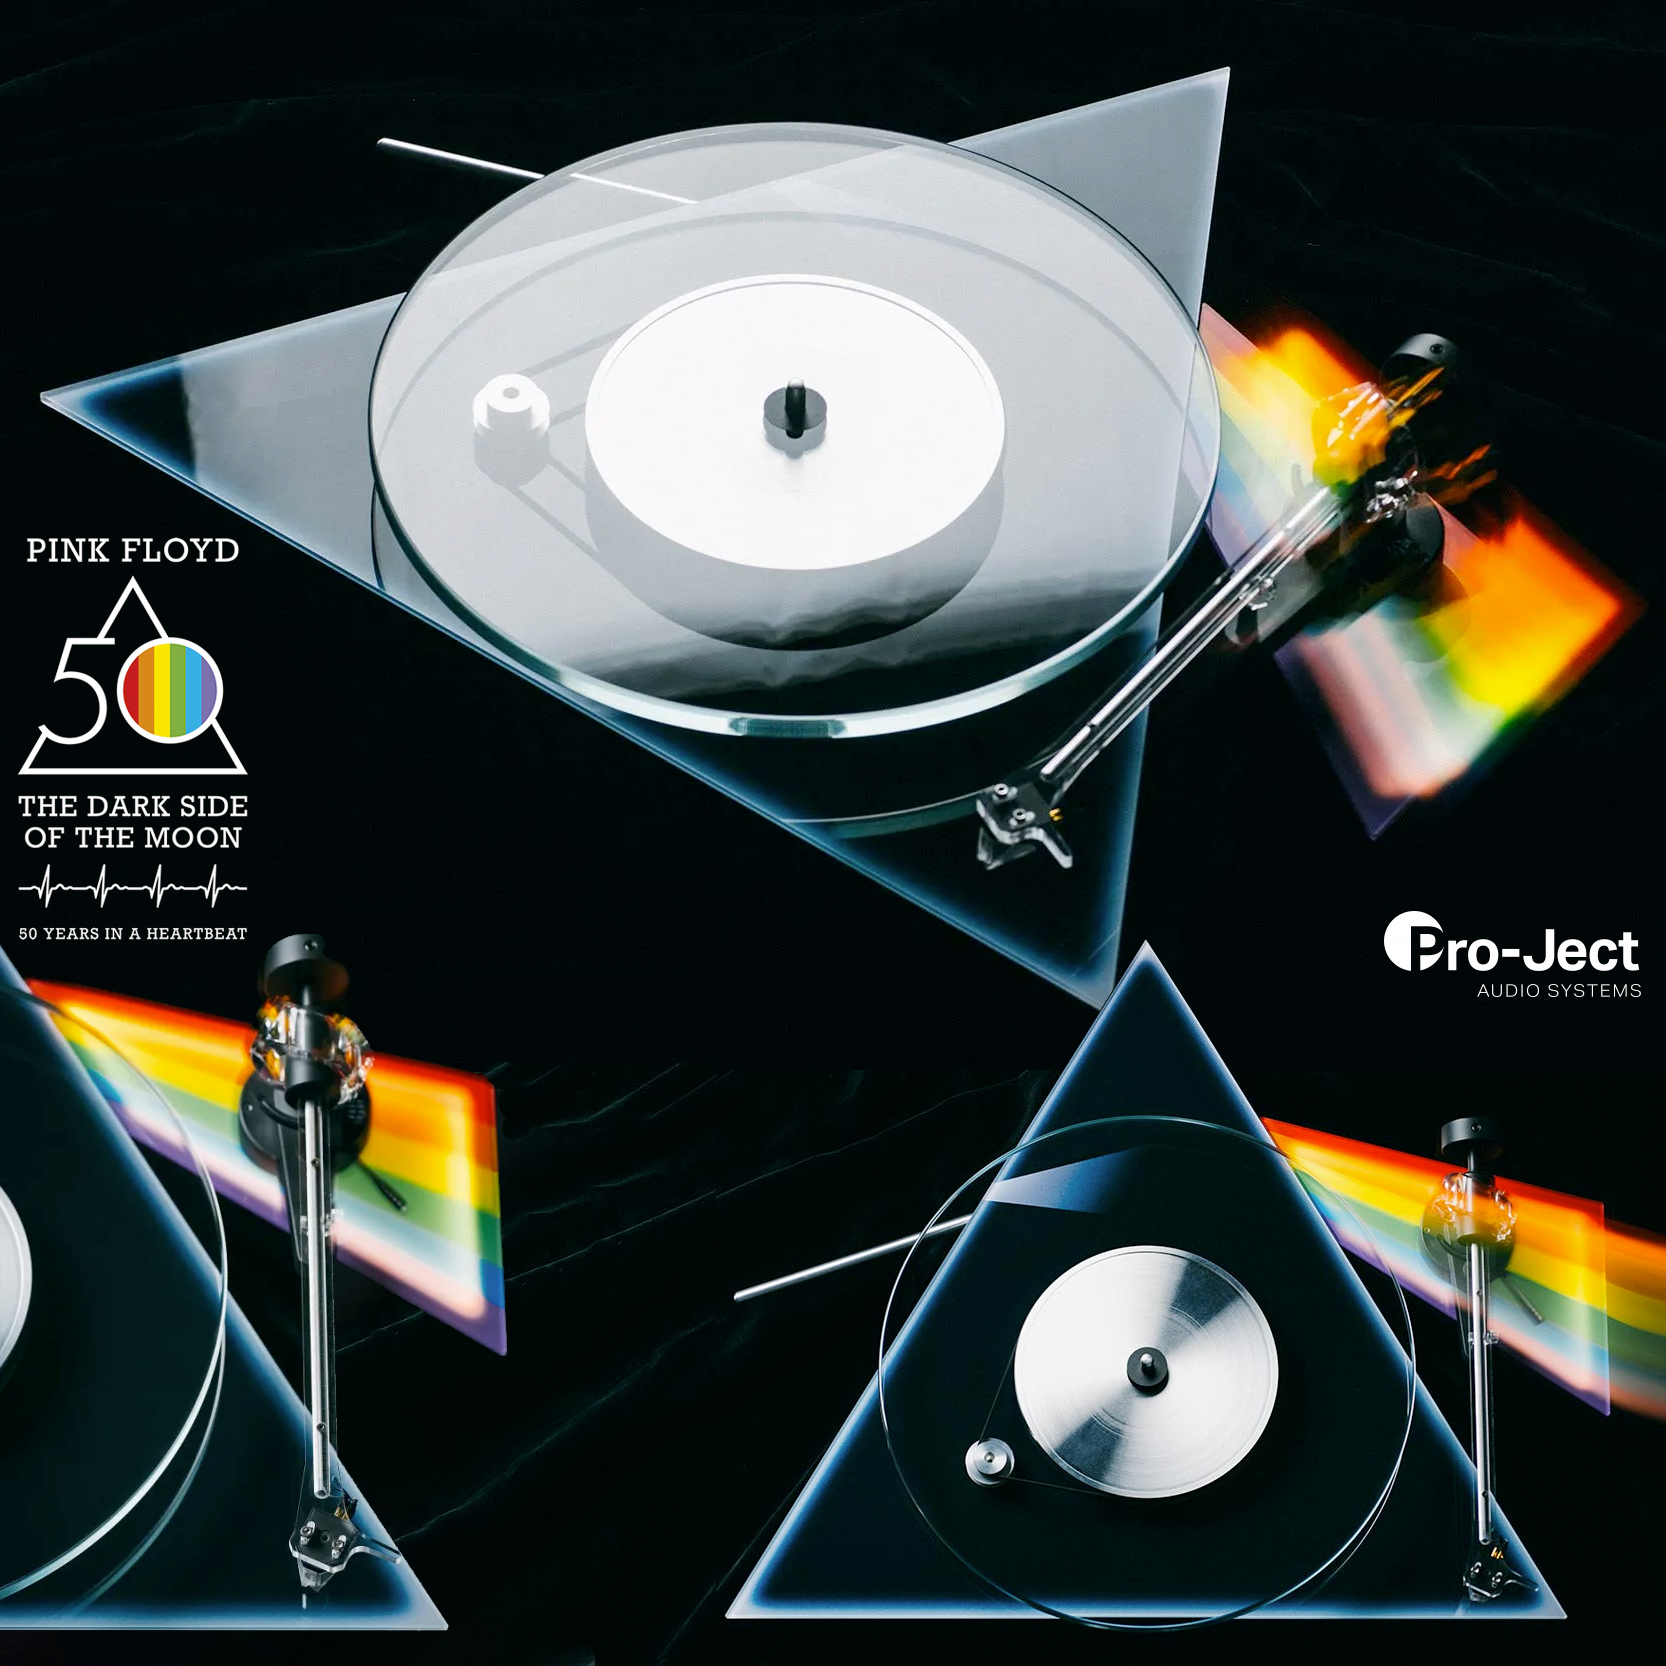 Toca-discos The Dark Side of the Moon 50 Anos - Pink Floyd Pro-Ject Turntable